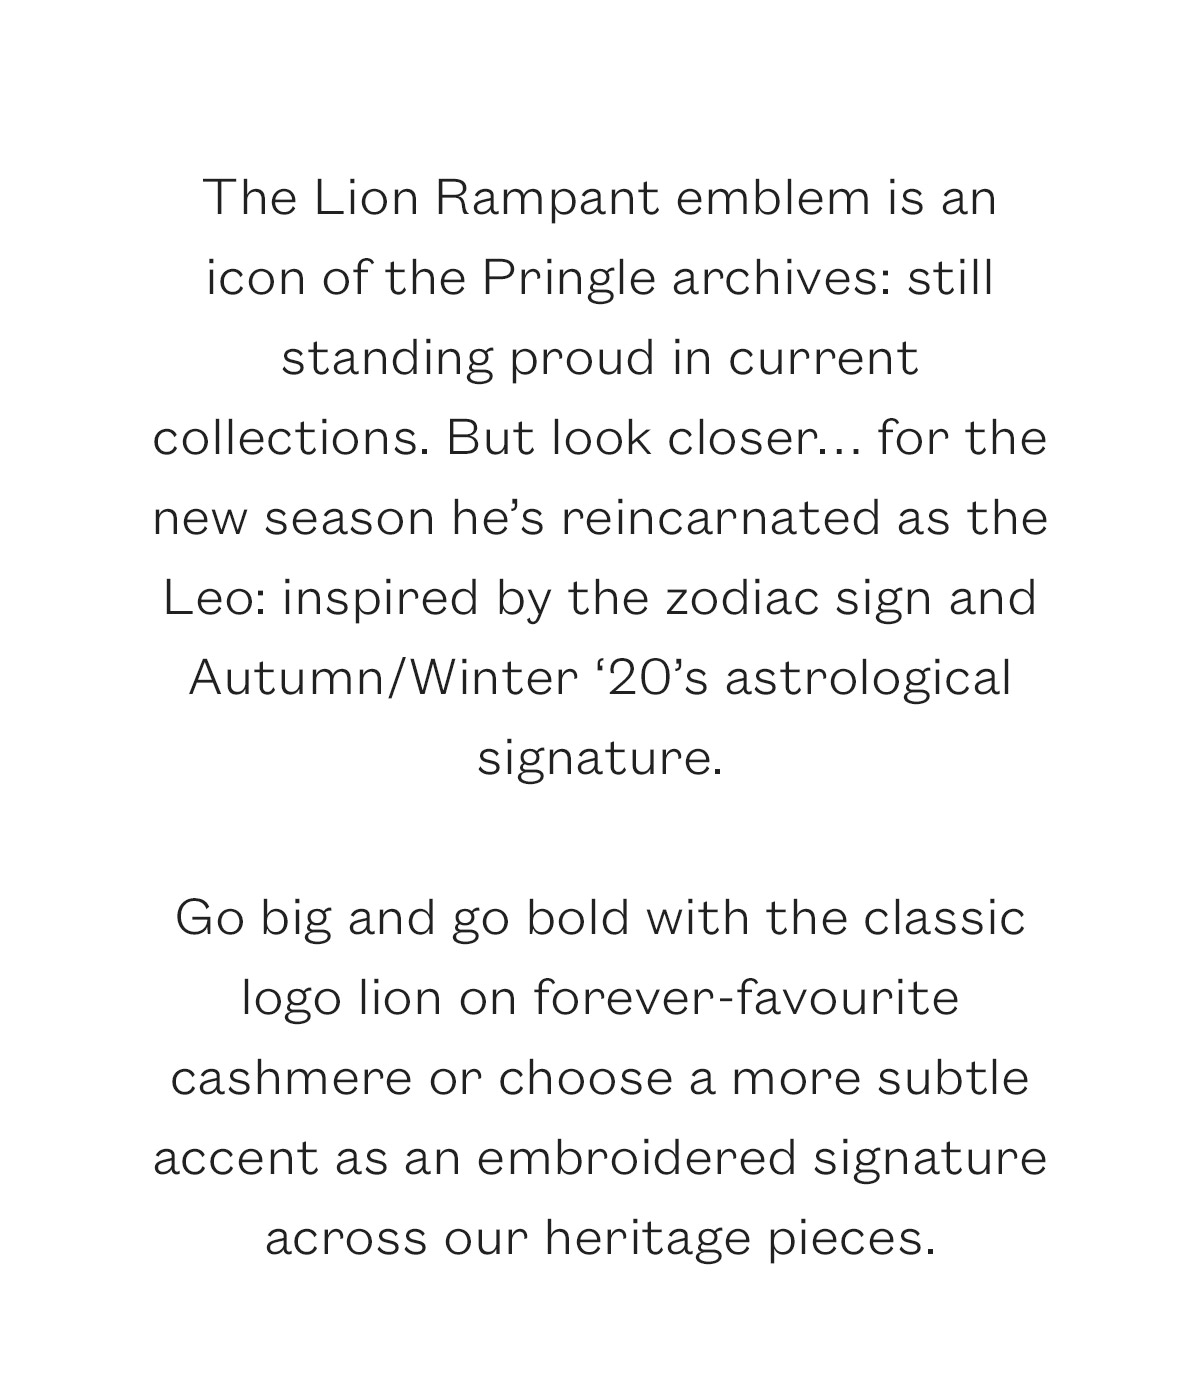 The Lion Rampant emblem is an icon of the Pringle archives: still standing proud in current collections. But look closer. for the new season he's reincarnated as the Leo: inspired by the zodiac sign and Autumn/Winter '20's astrological signature.  Go big and go bold with the classic logo lion on forever-favourite cashmere or choose a more subtle accent as an embroidered signature across our heritage pieces. 